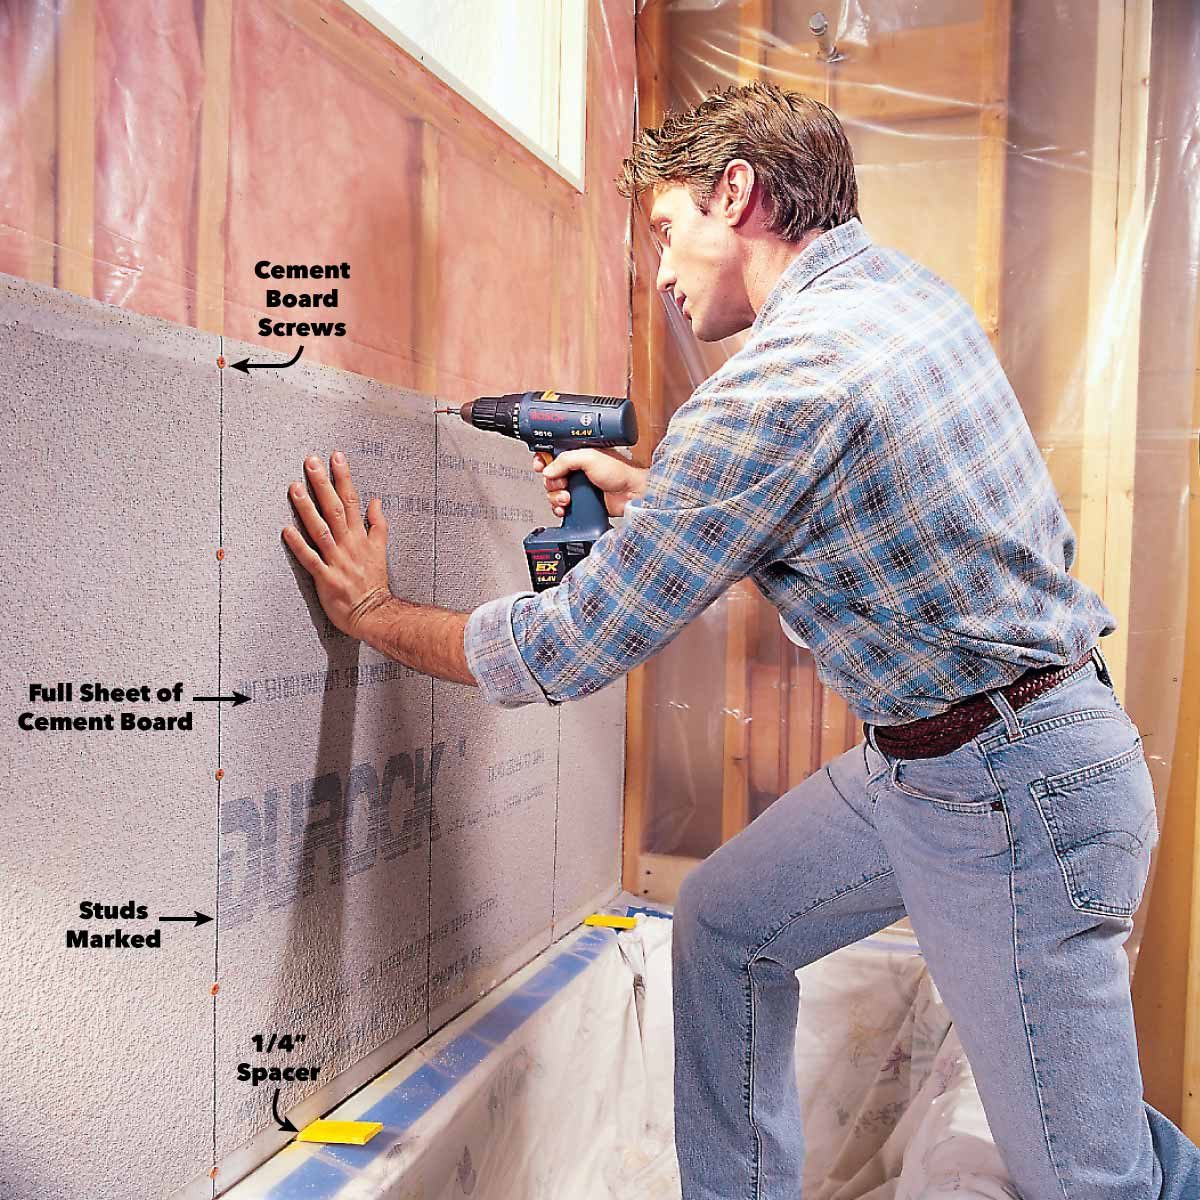 How To Install Cement Board For Tile Projects Family Handyman